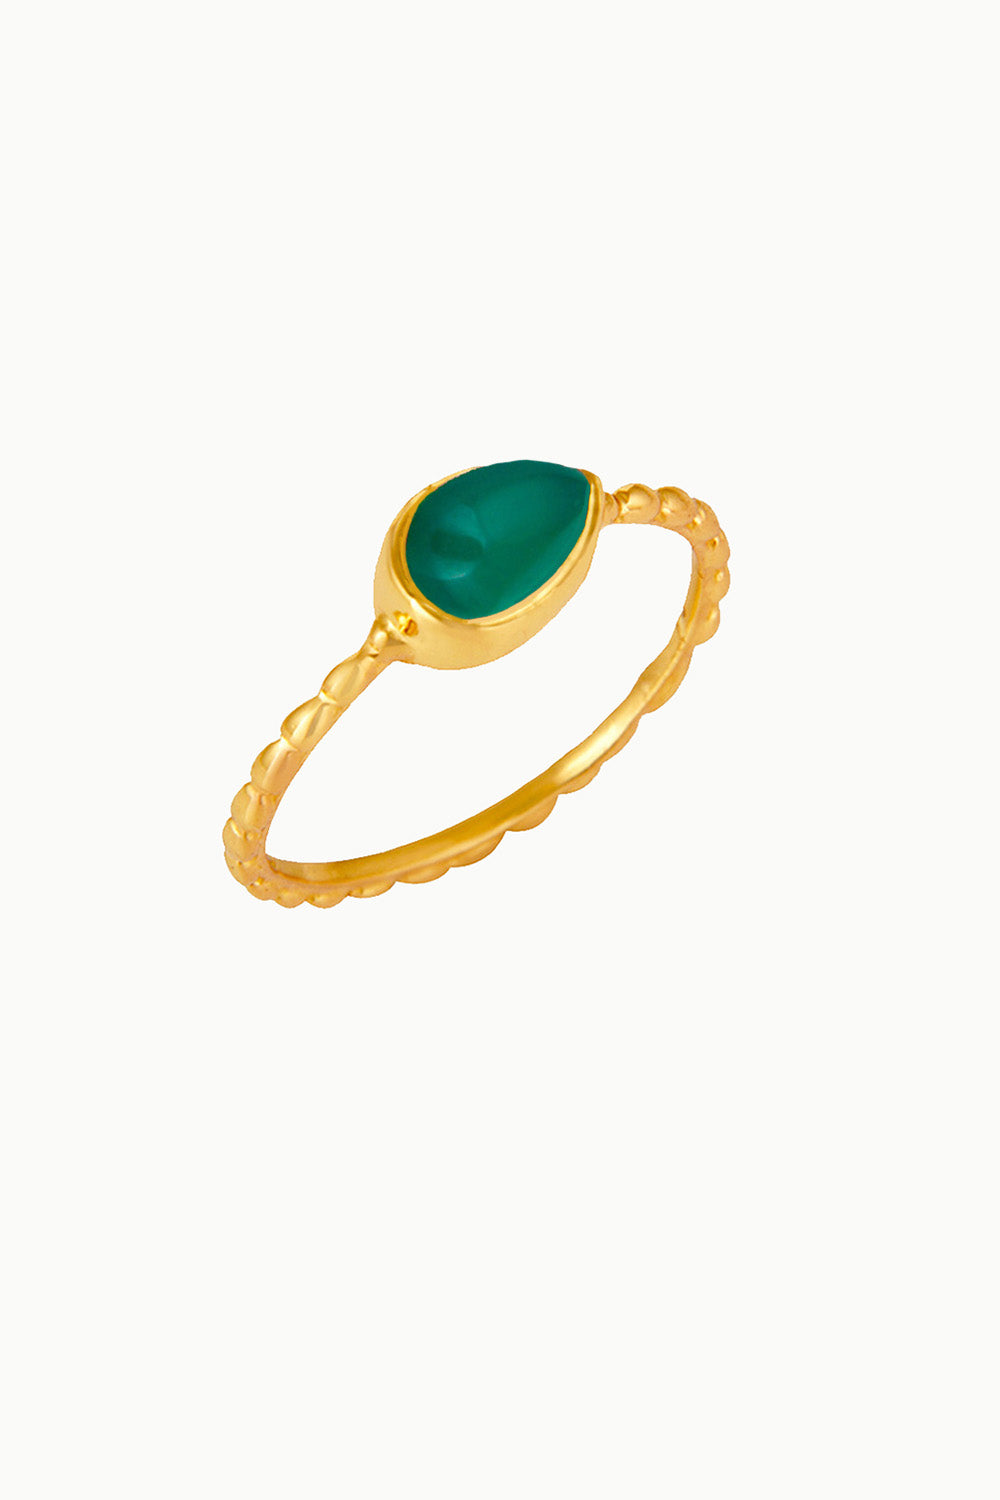 Green Onyx Pinky Ring in Gold Vermeil